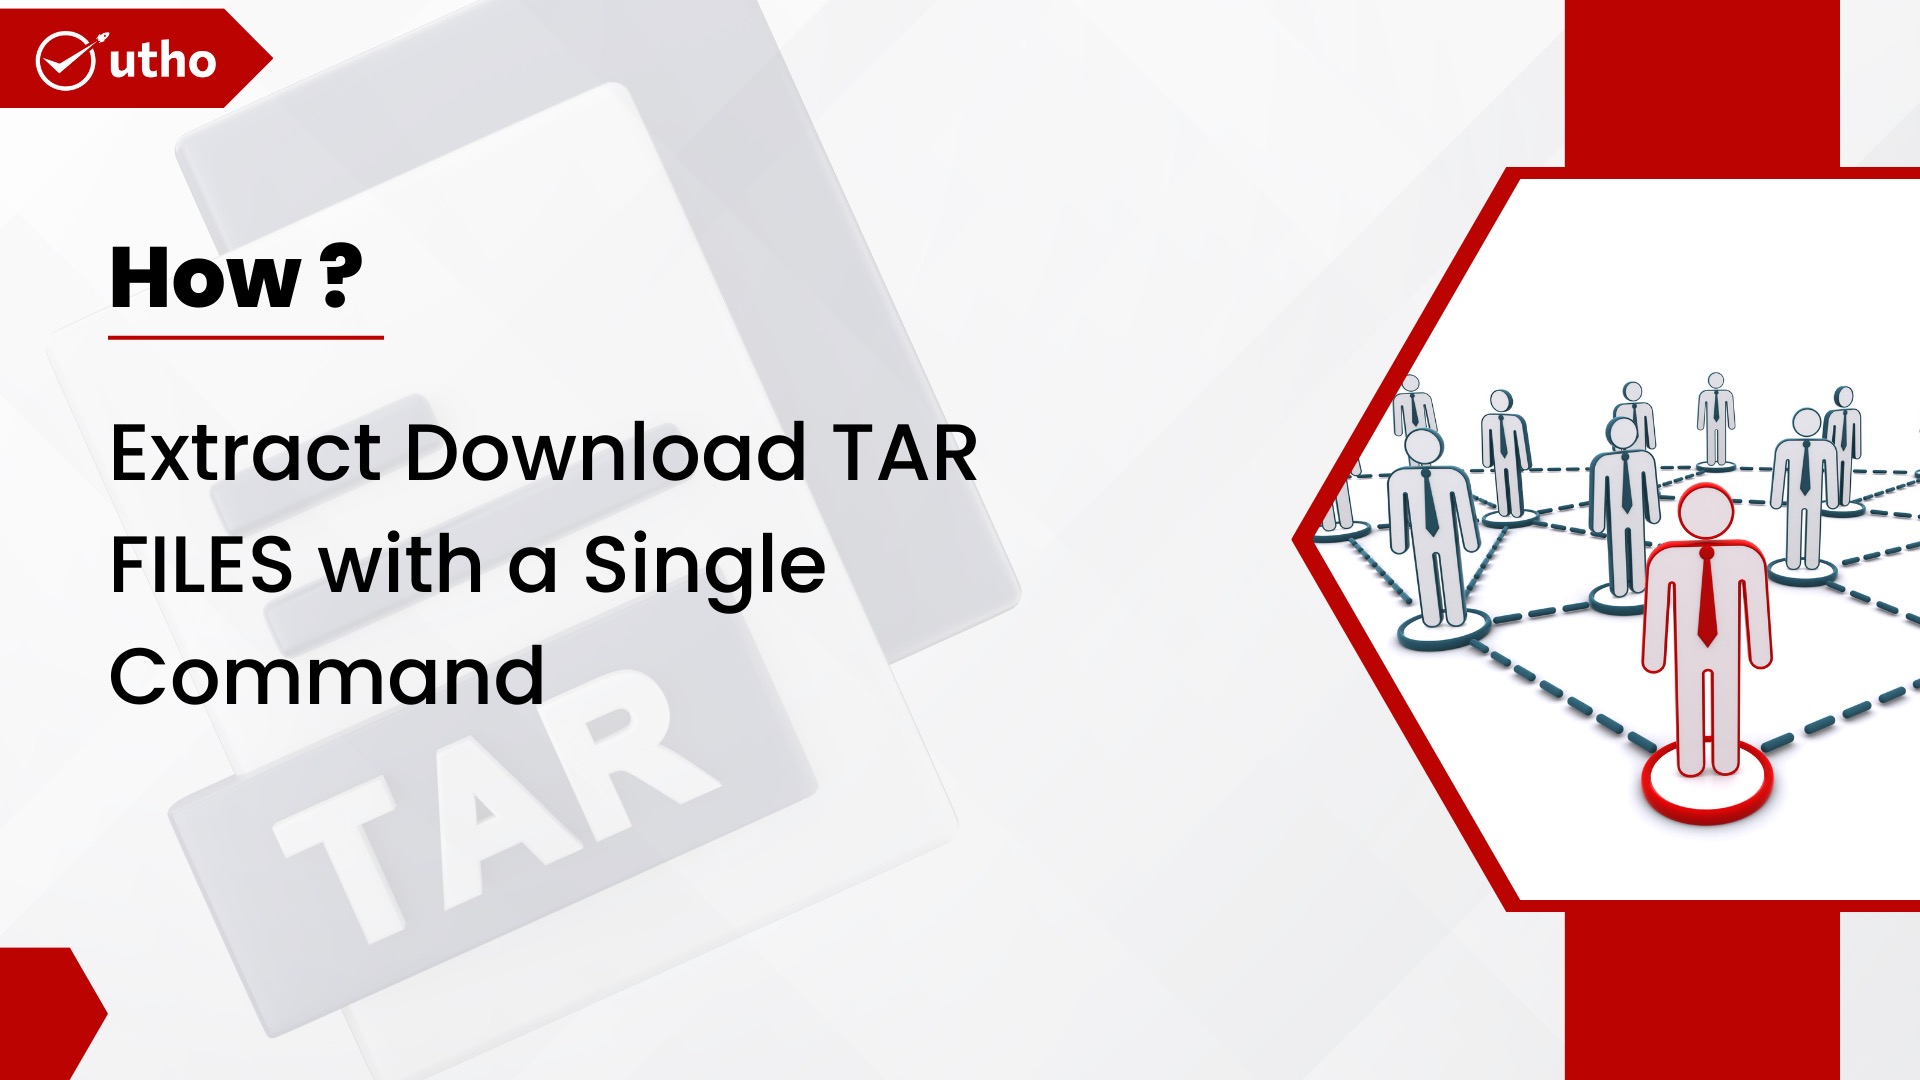 How to Extract and Download Tar Files with a Single Command